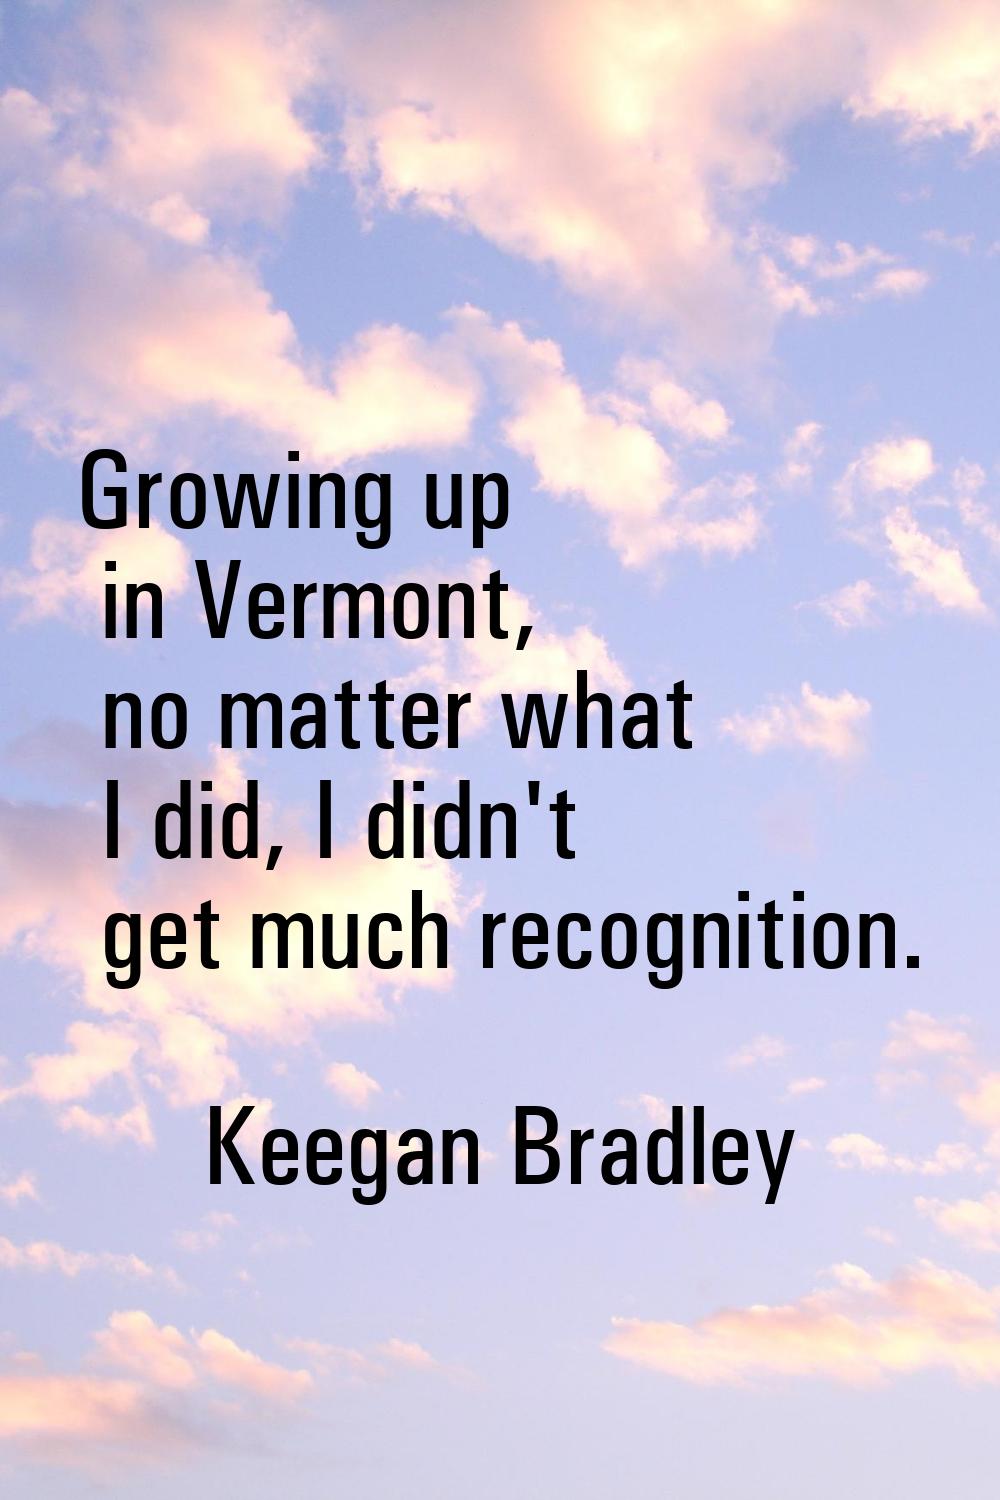 Growing up in Vermont, no matter what I did, I didn't get much recognition.